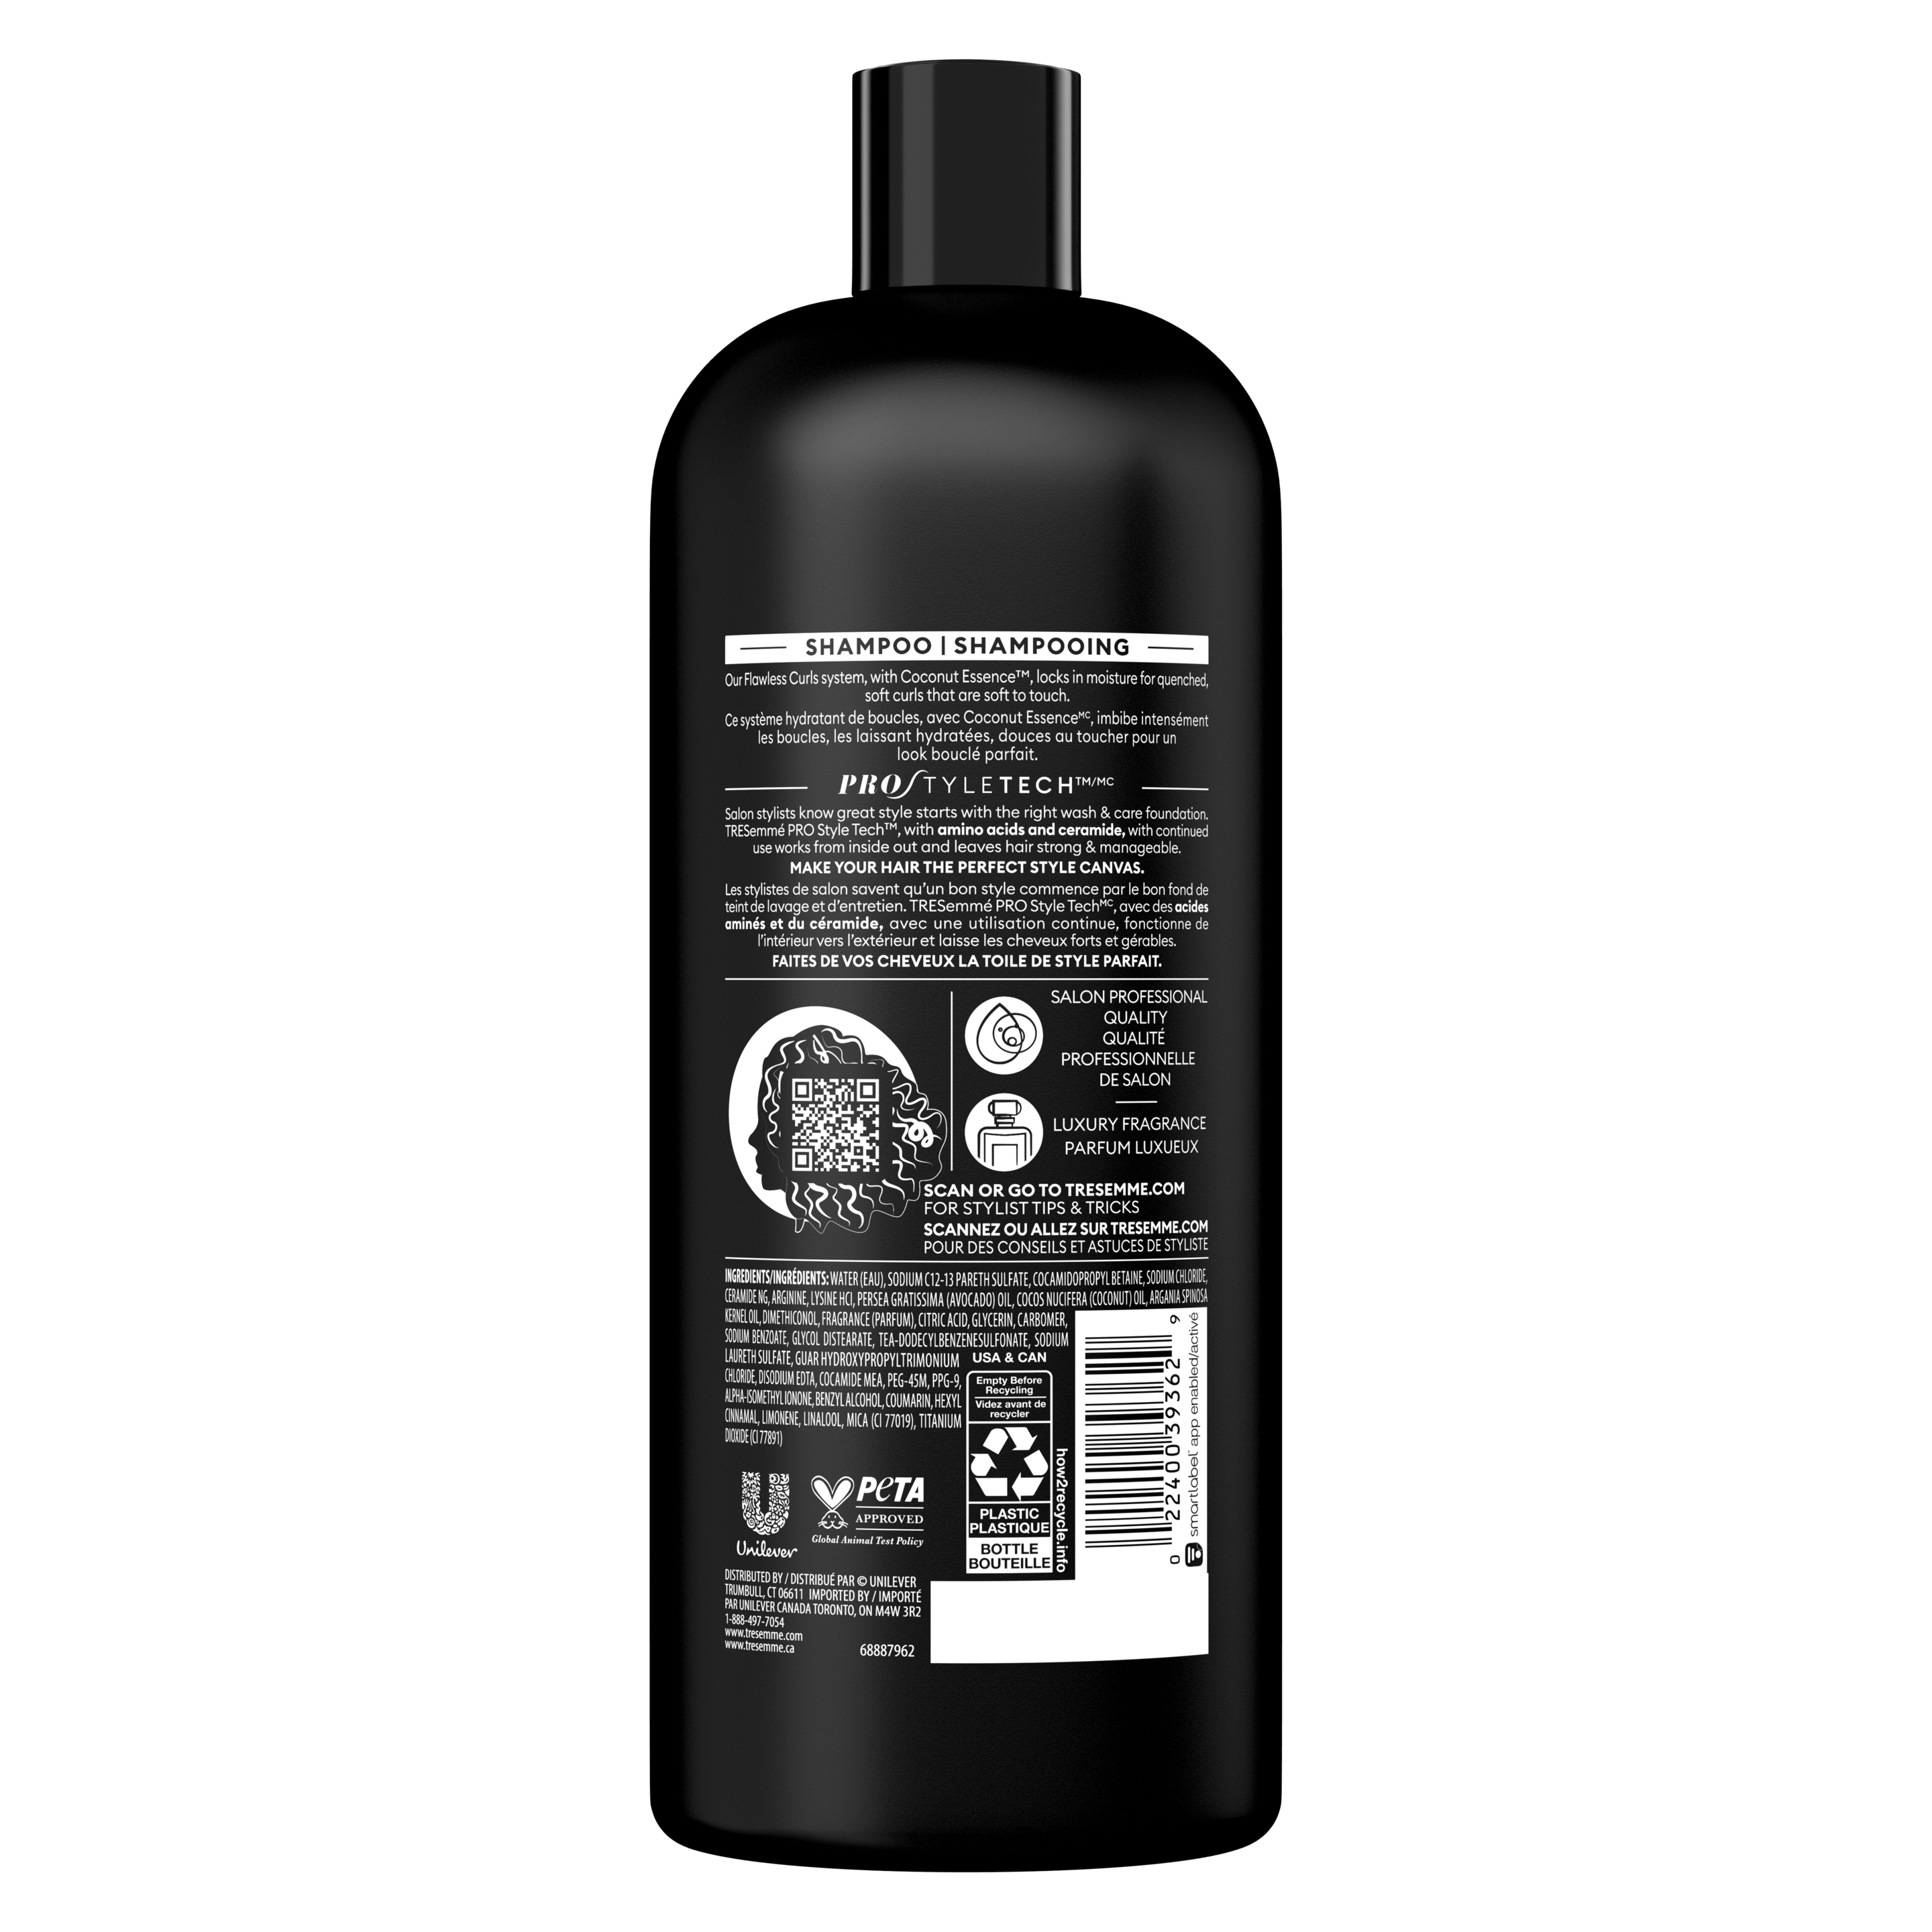 Flawless Curls Shampoo for Curly Hair